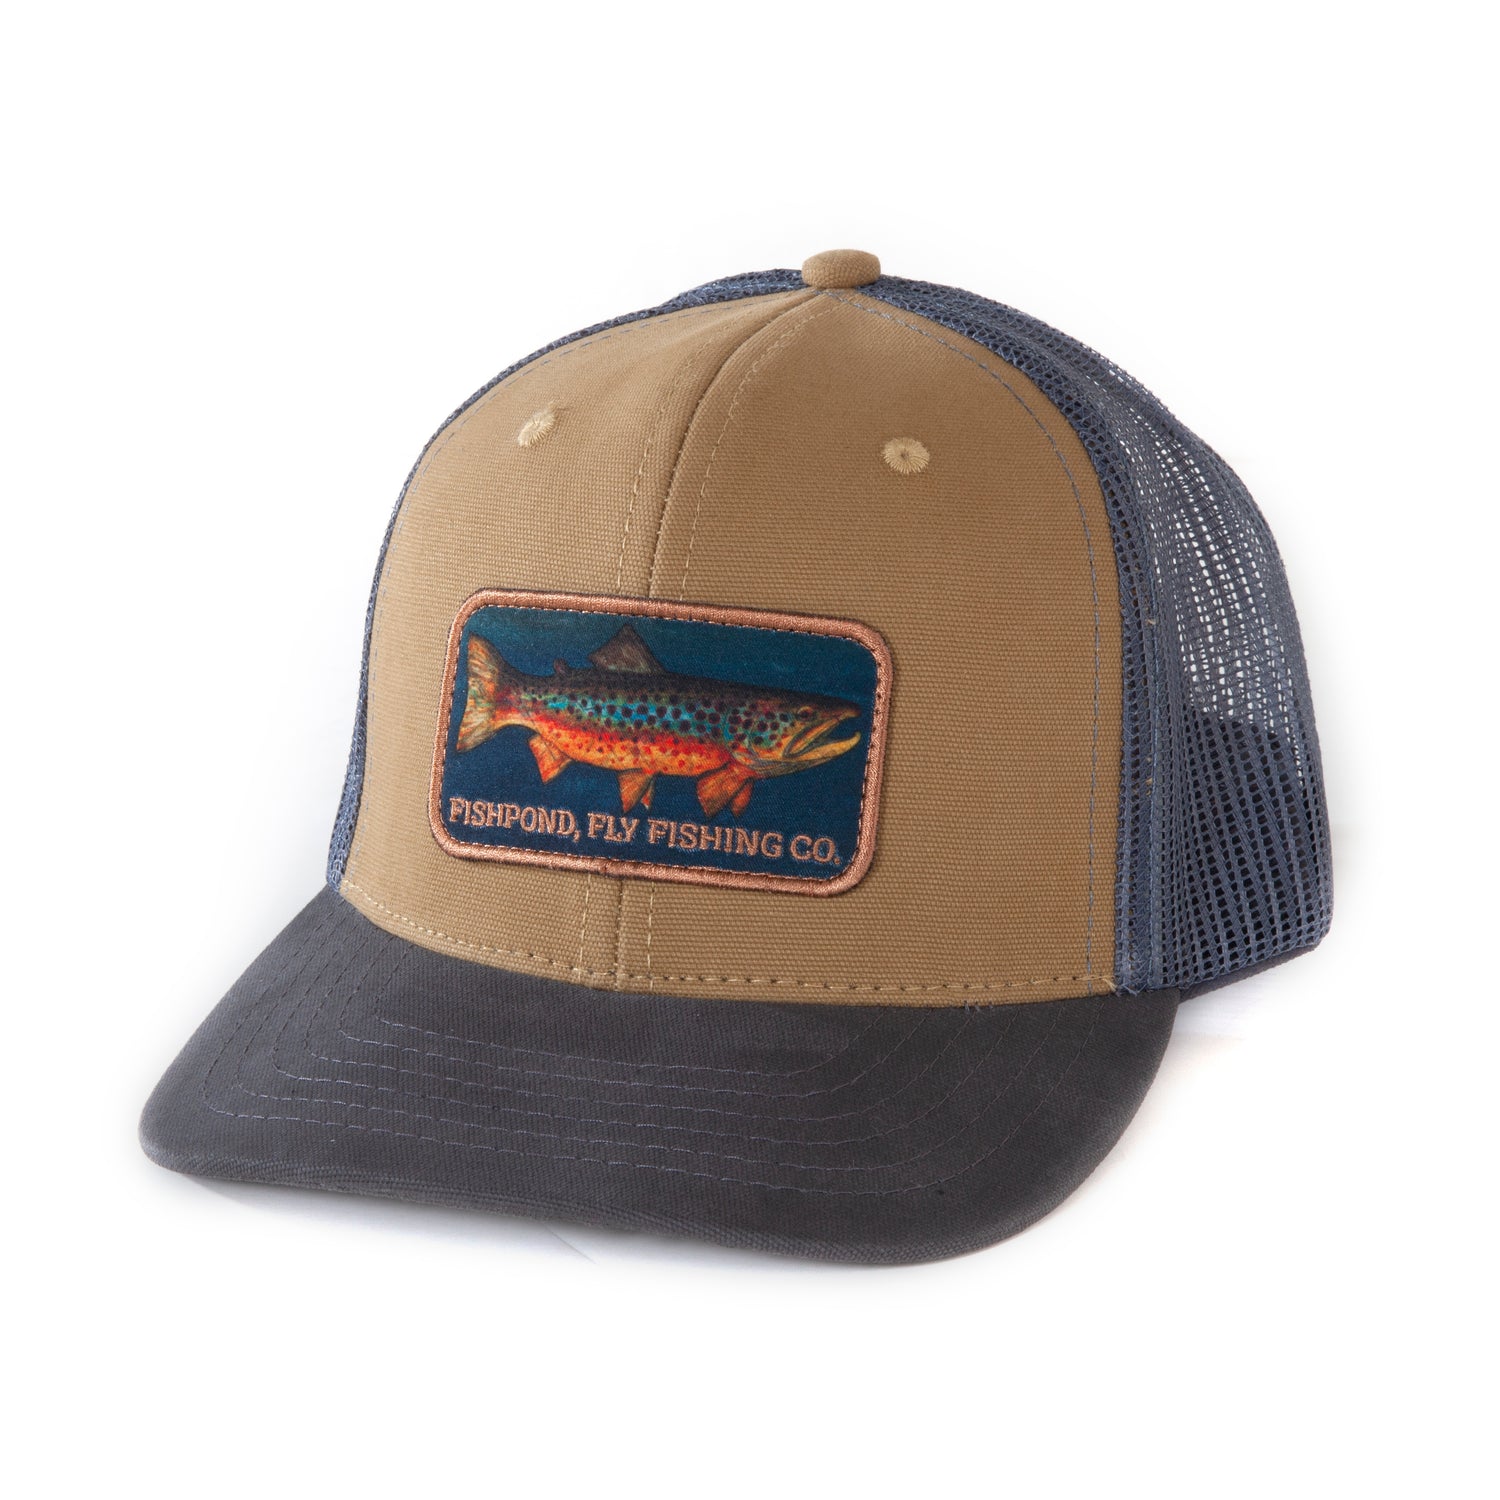 Local Hat – Fishpond